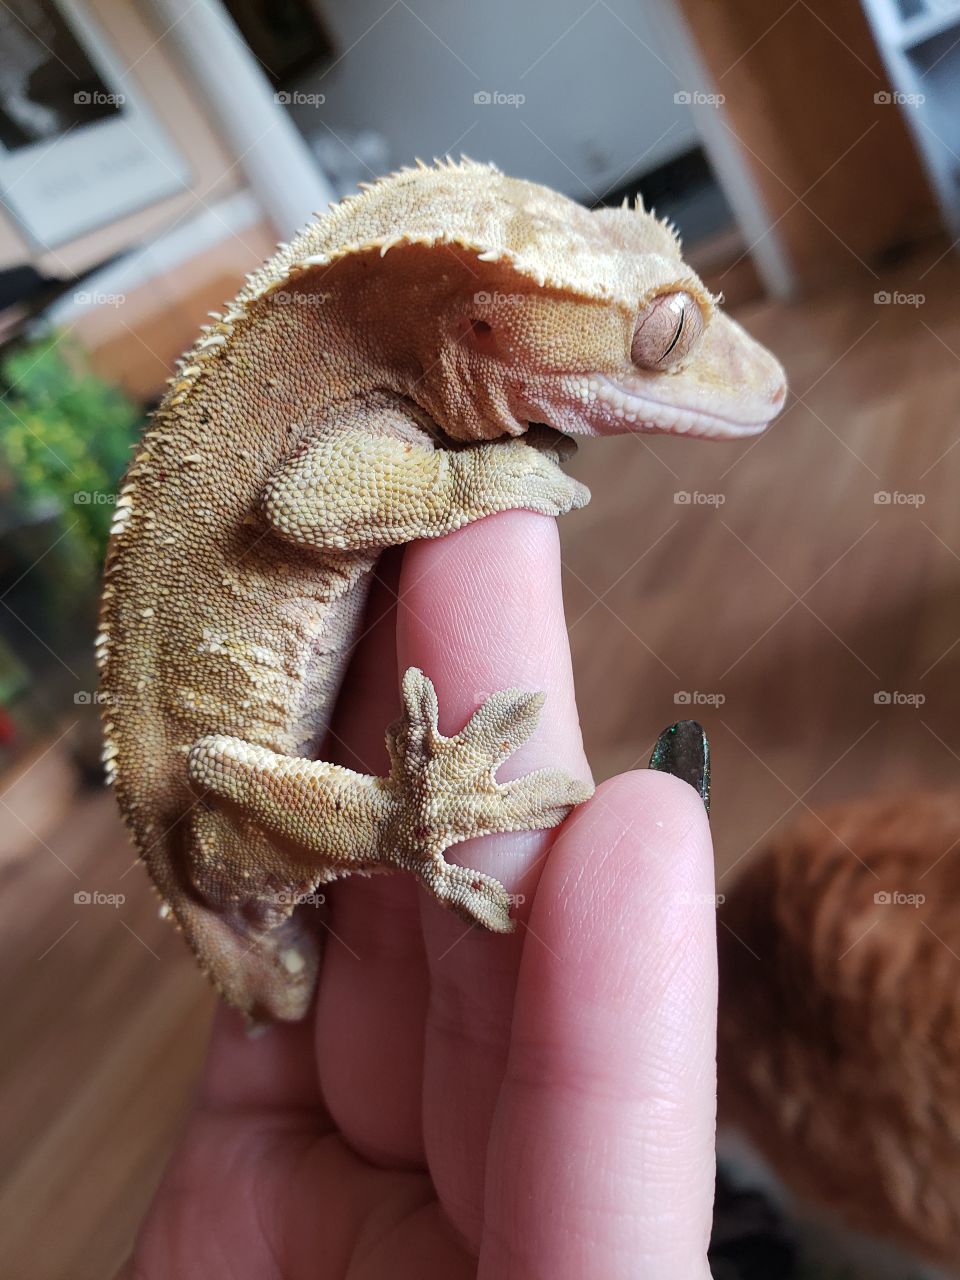 Crested Gecko male sitting on hand, cute pet.